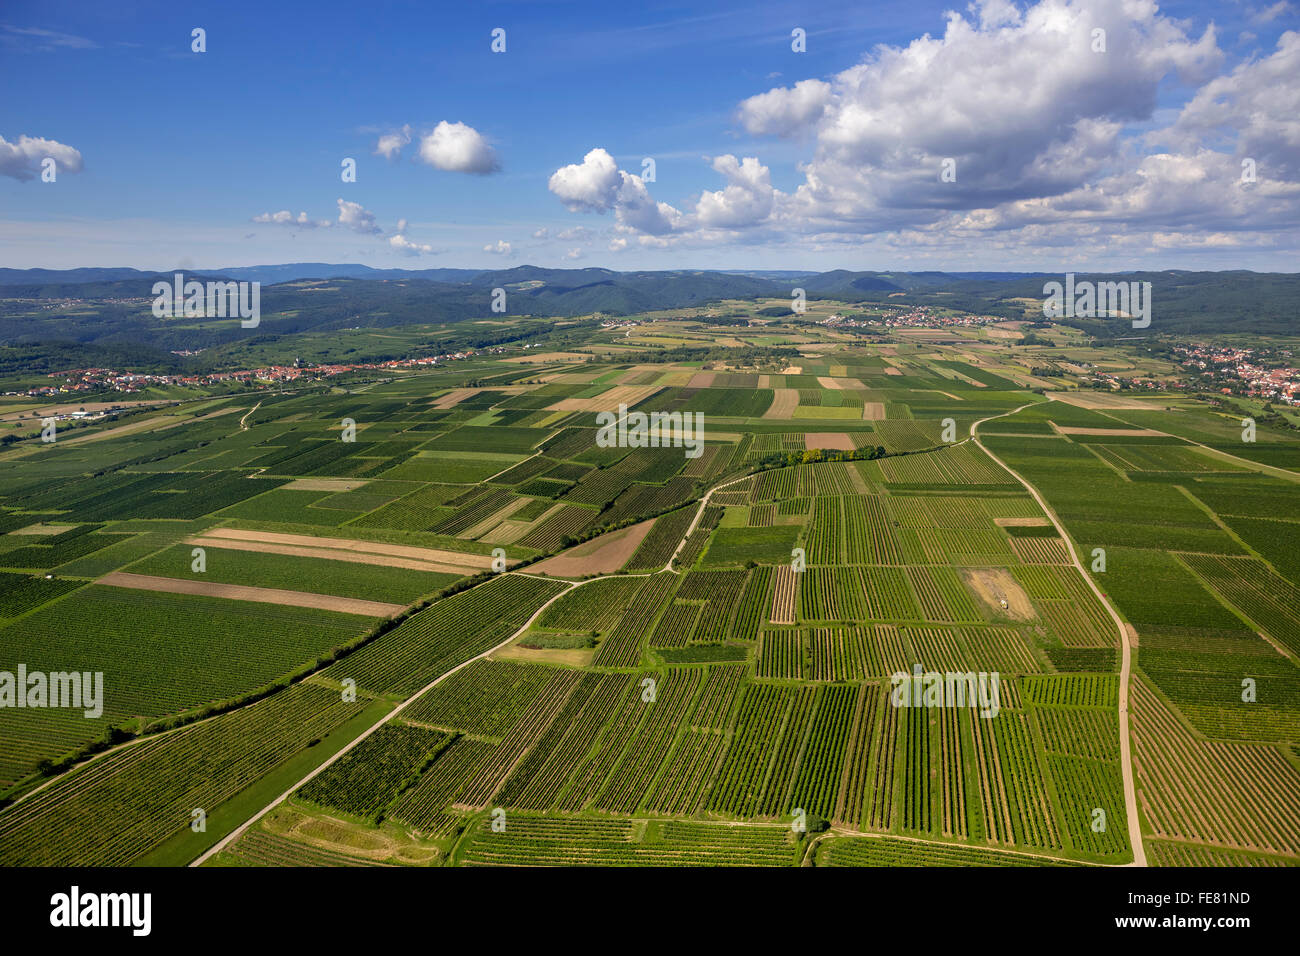 Aerial view, meadows and fields in Lower Austria, agriculture, Lengenfeld, Lower Austria, Austria, Europe, Aerial view, Stock Photo